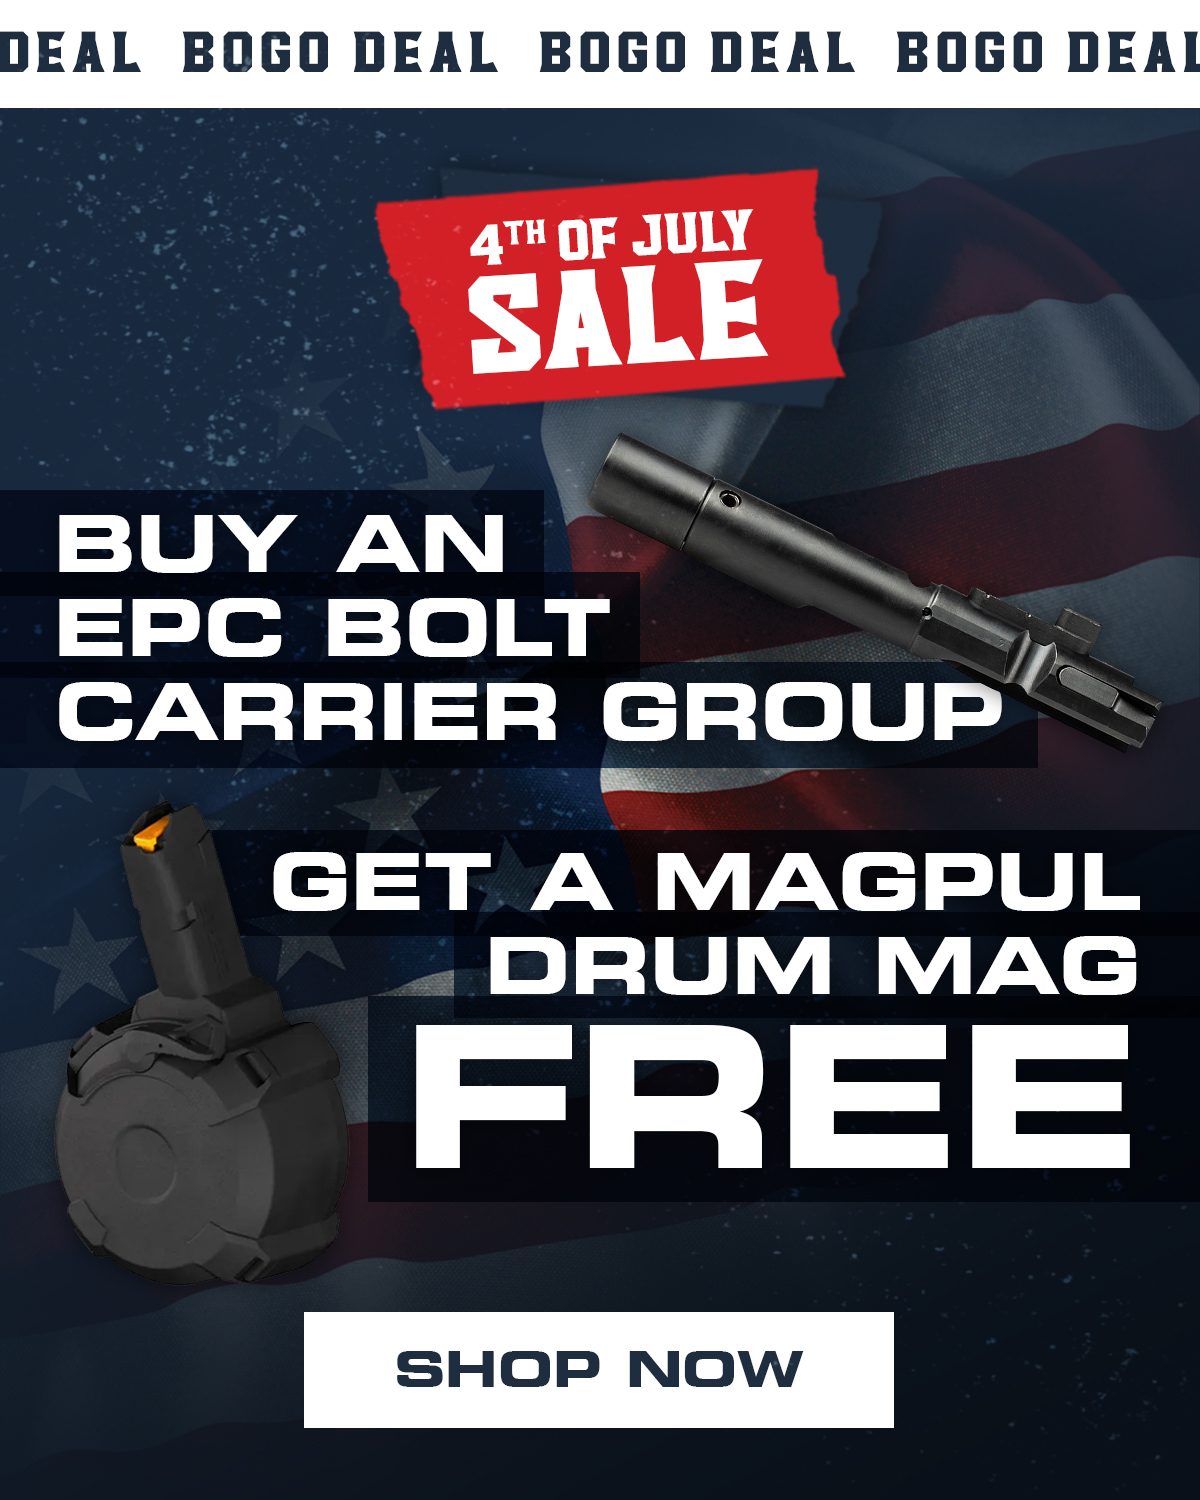 4TH OF JULY SALE | BOGO DEAL: BUY AN EPC BOLT CARRIER GROUP, GET A MAGPUL DRUM MAG FREE | SHOP NOW